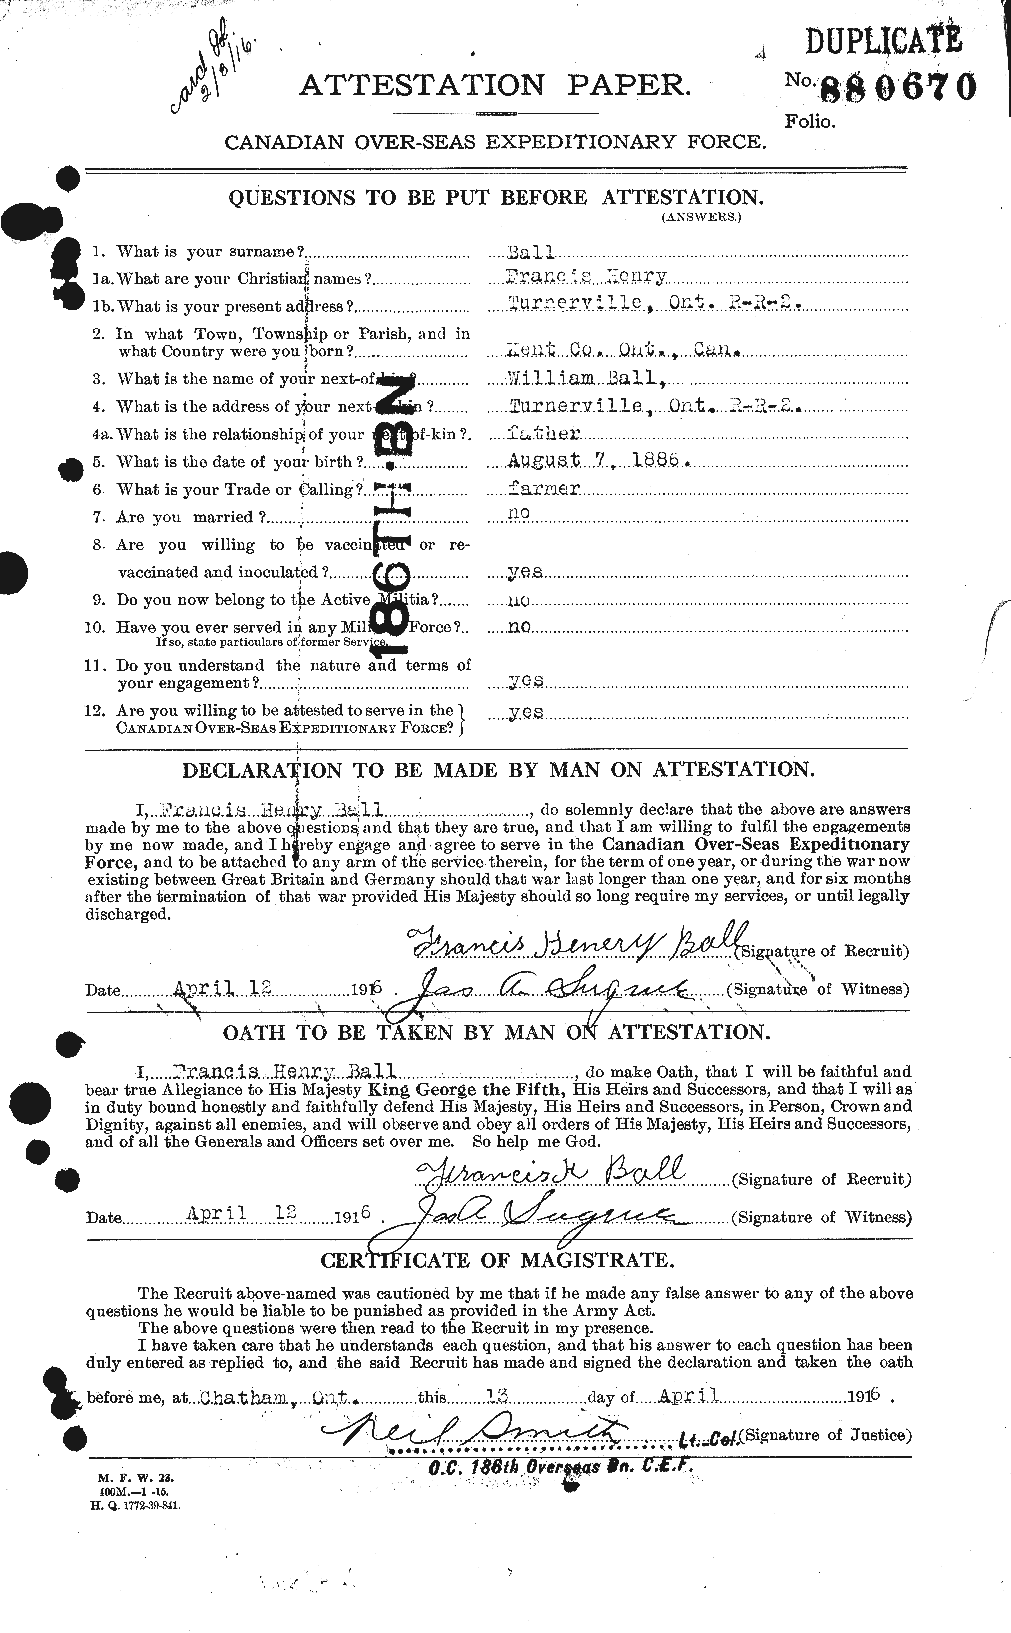 Personnel Records of the First World War - CEF 225807a